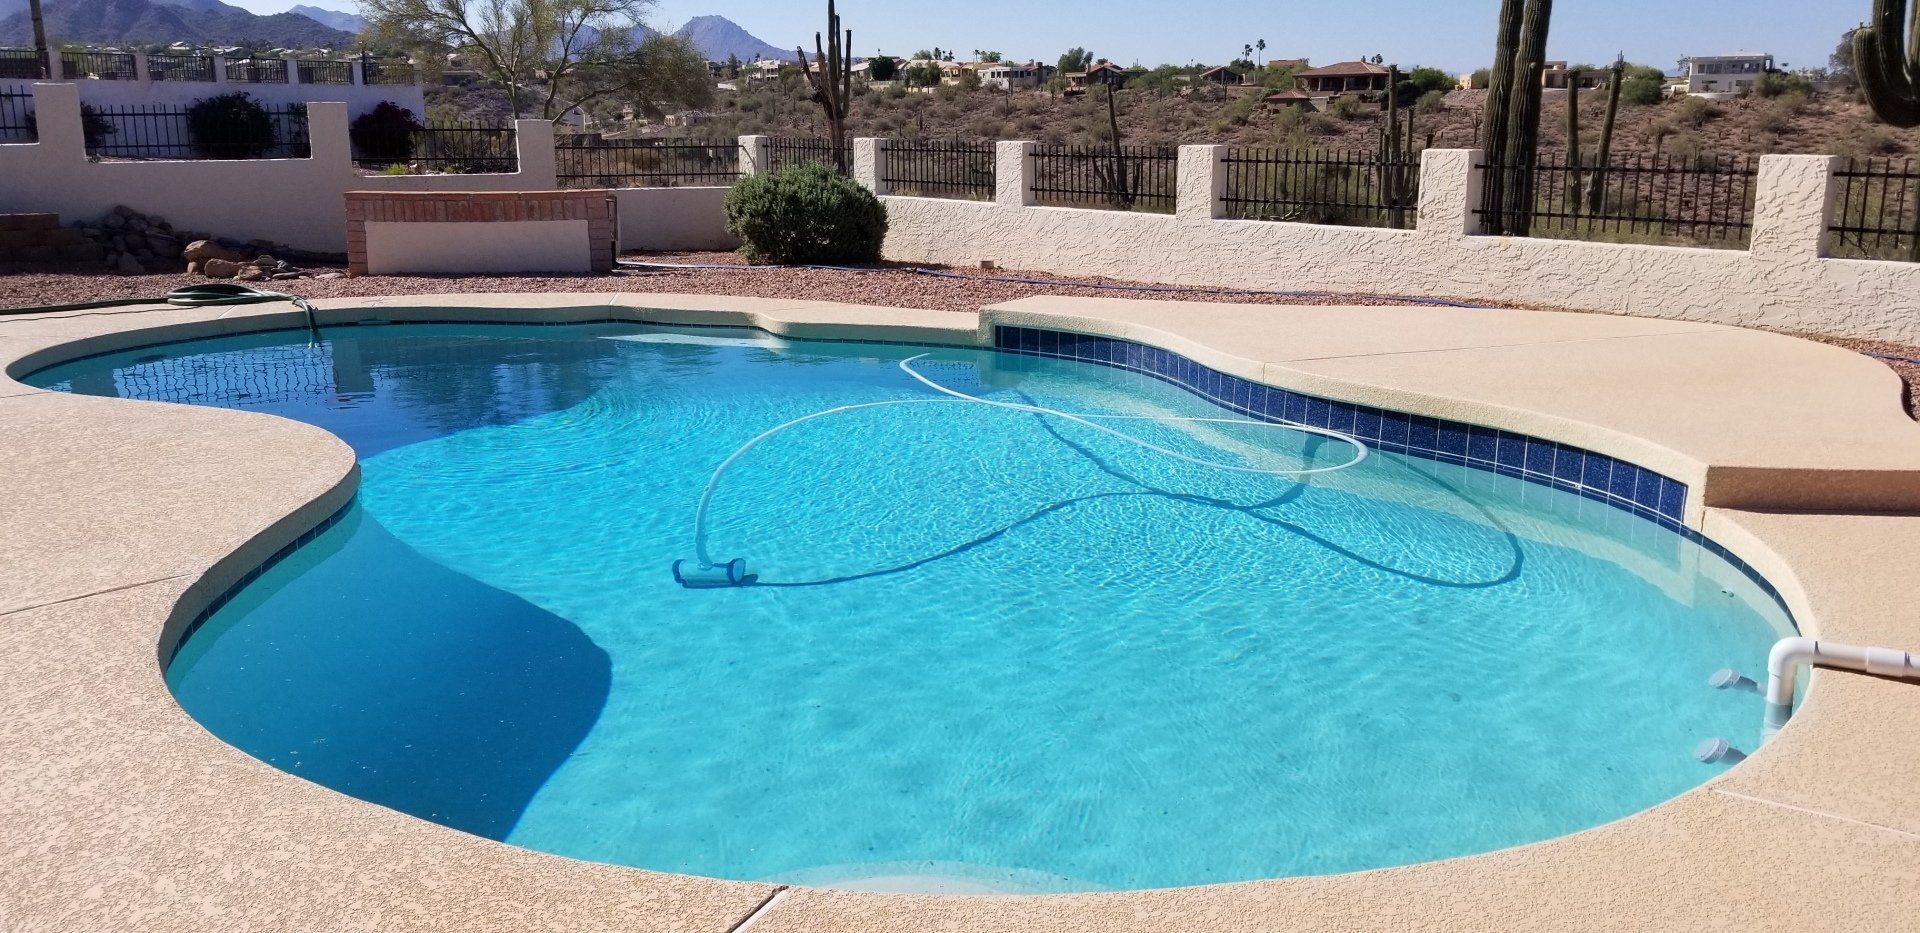 Pool Draining Service in Scottsdale, AZ | No Drainer Water Purification Services